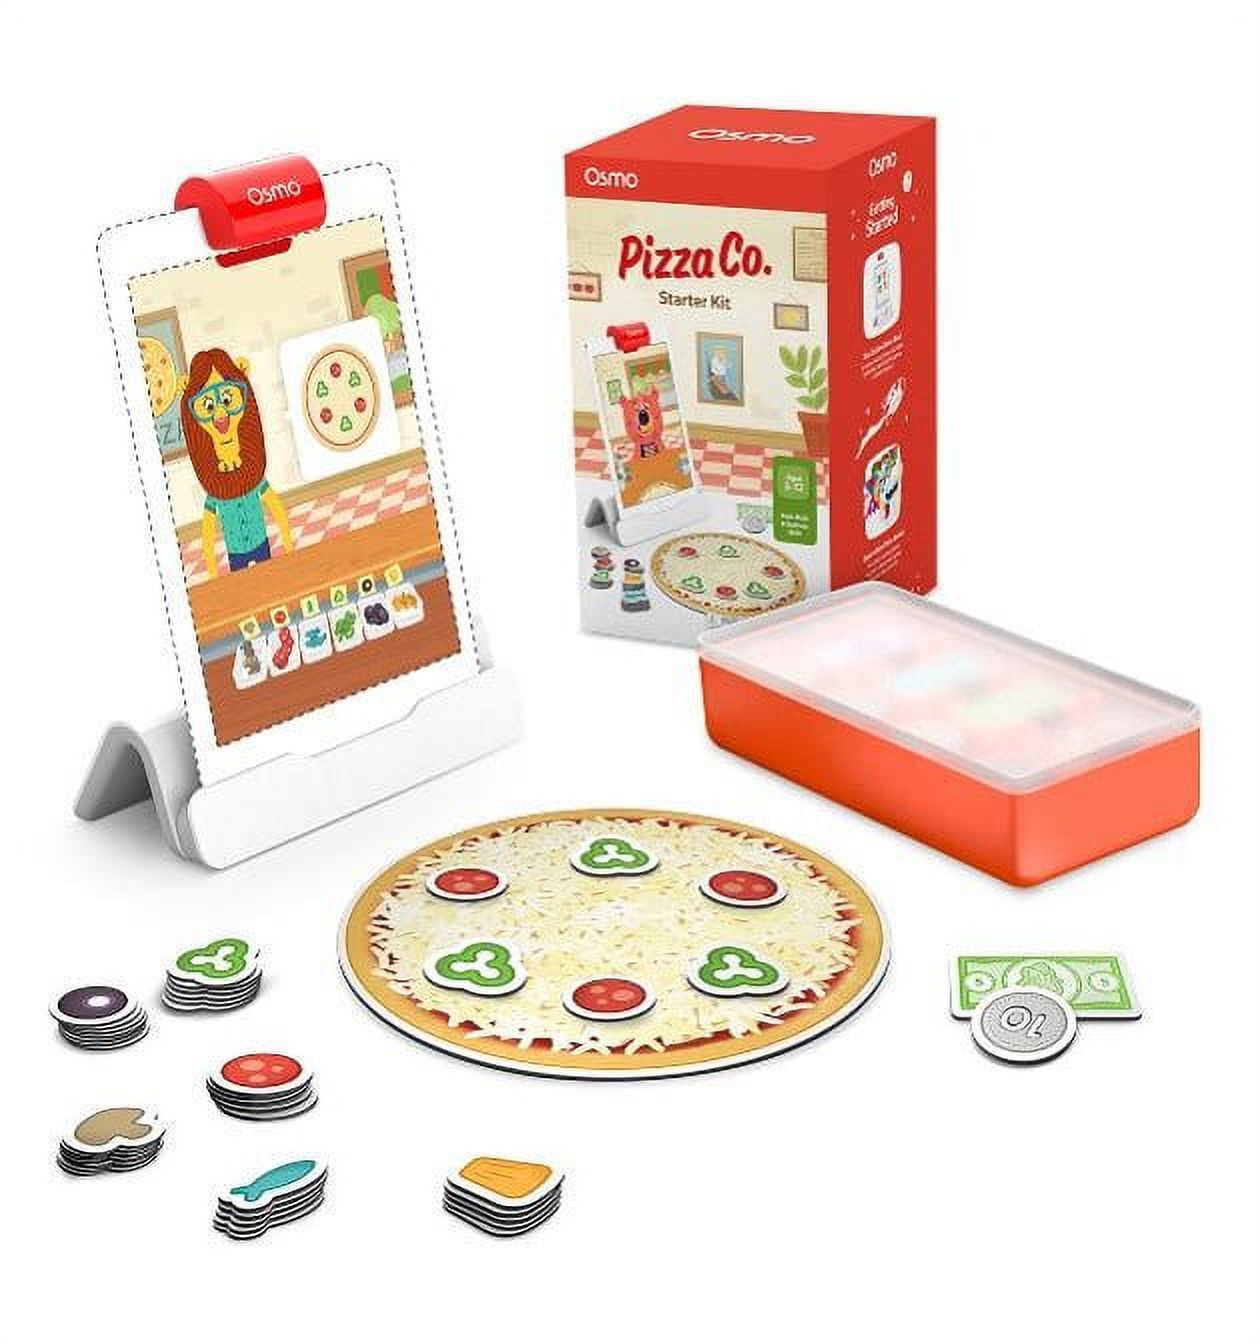 Osmo - Pizza Co. Starter Kit for iPad, Age 5-12, Pretend Play, Pizza Toy, Kitchen Play Set, Puzzles for Kids, Math Games, Play Money, Kid Learning Toys, Educational Toy, Electronic Games - image 1 of 8